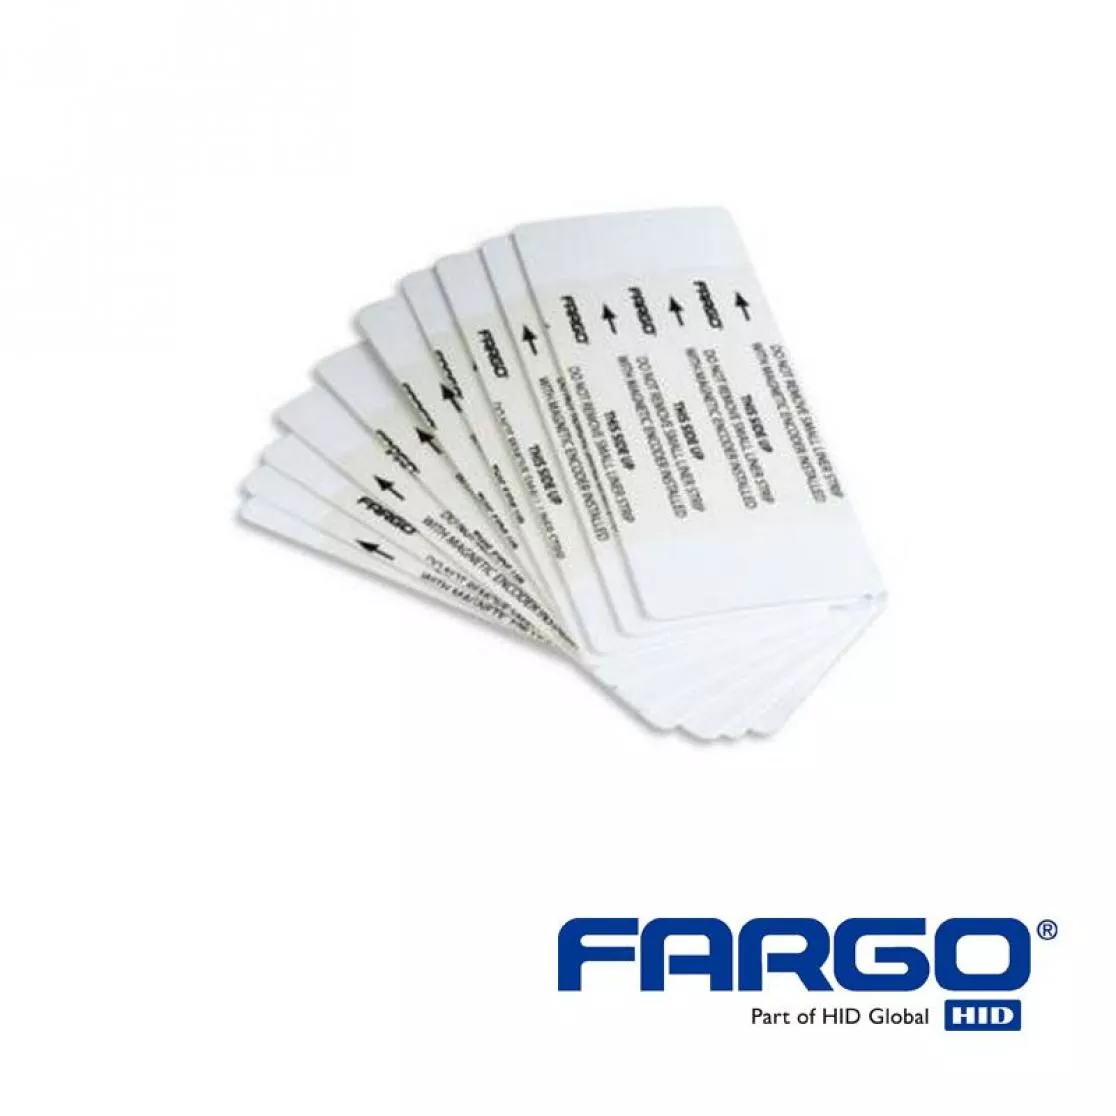 HID Fargo DTC4500e cleaning cards